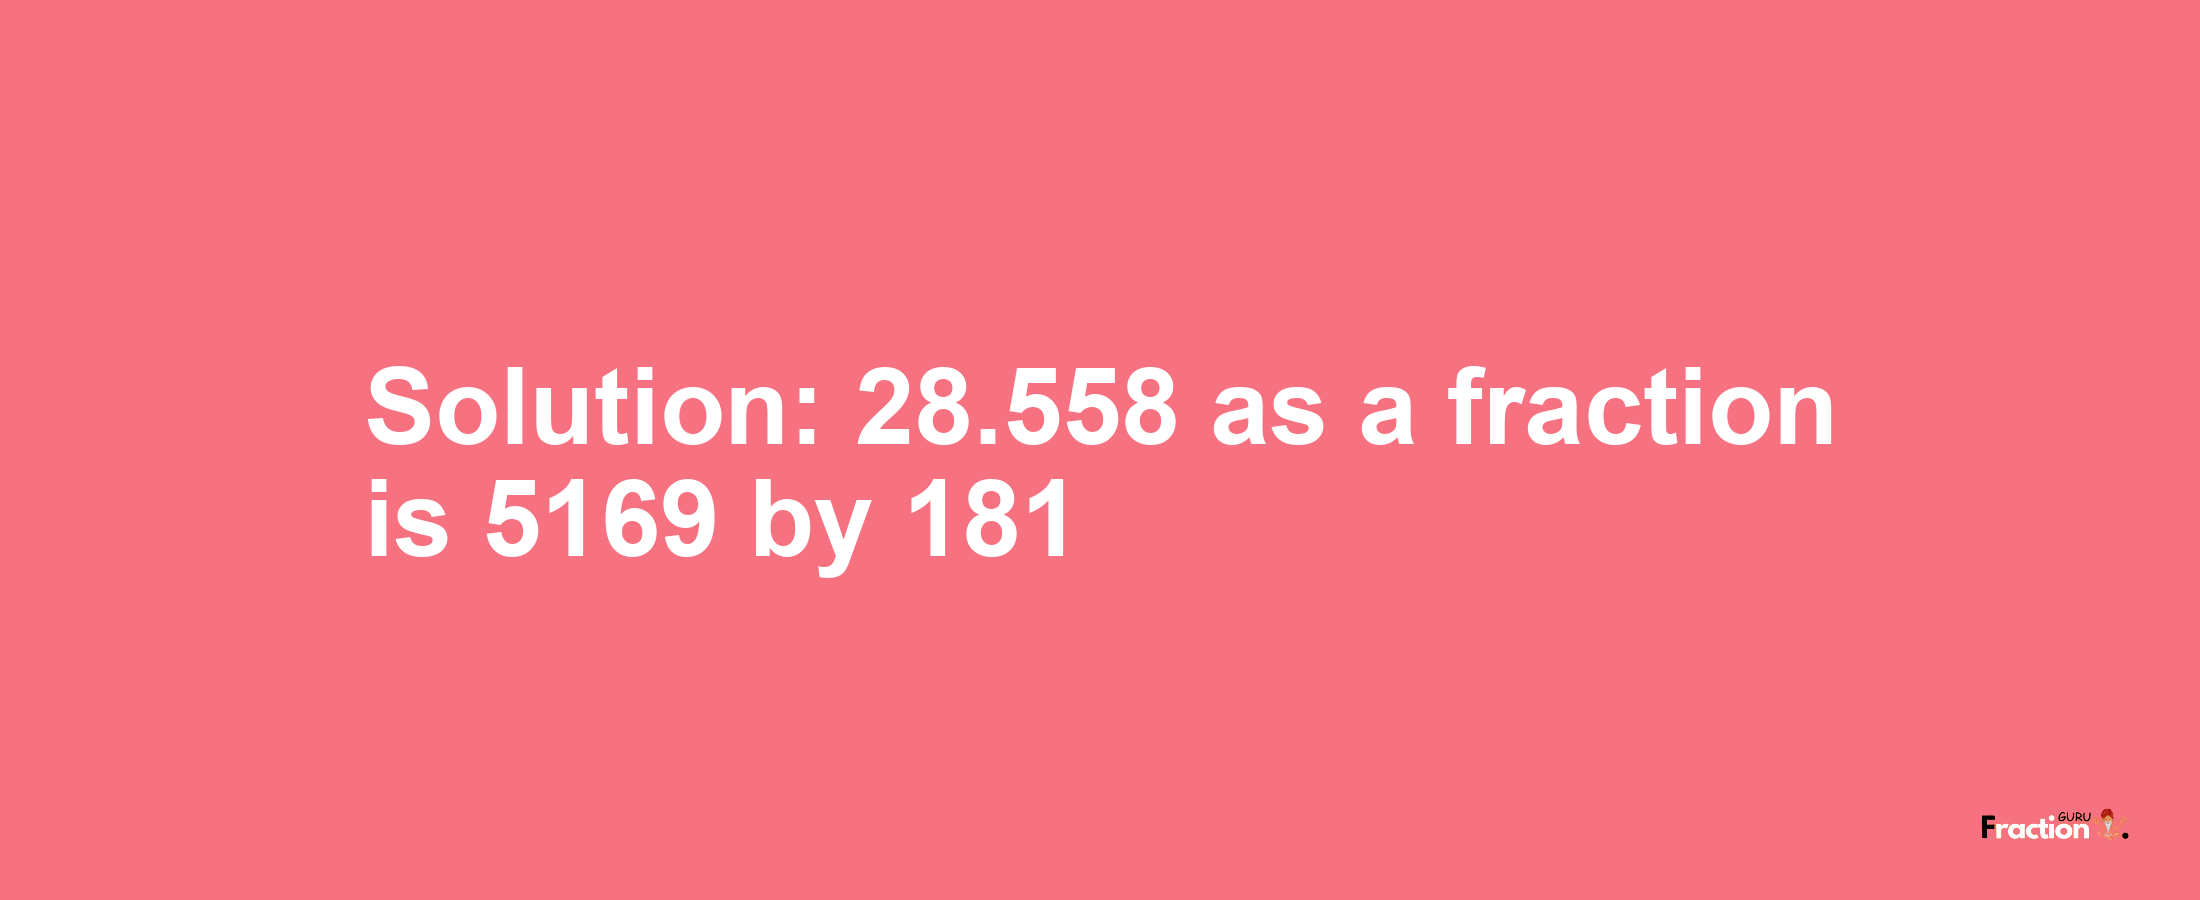 Solution:28.558 as a fraction is 5169/181